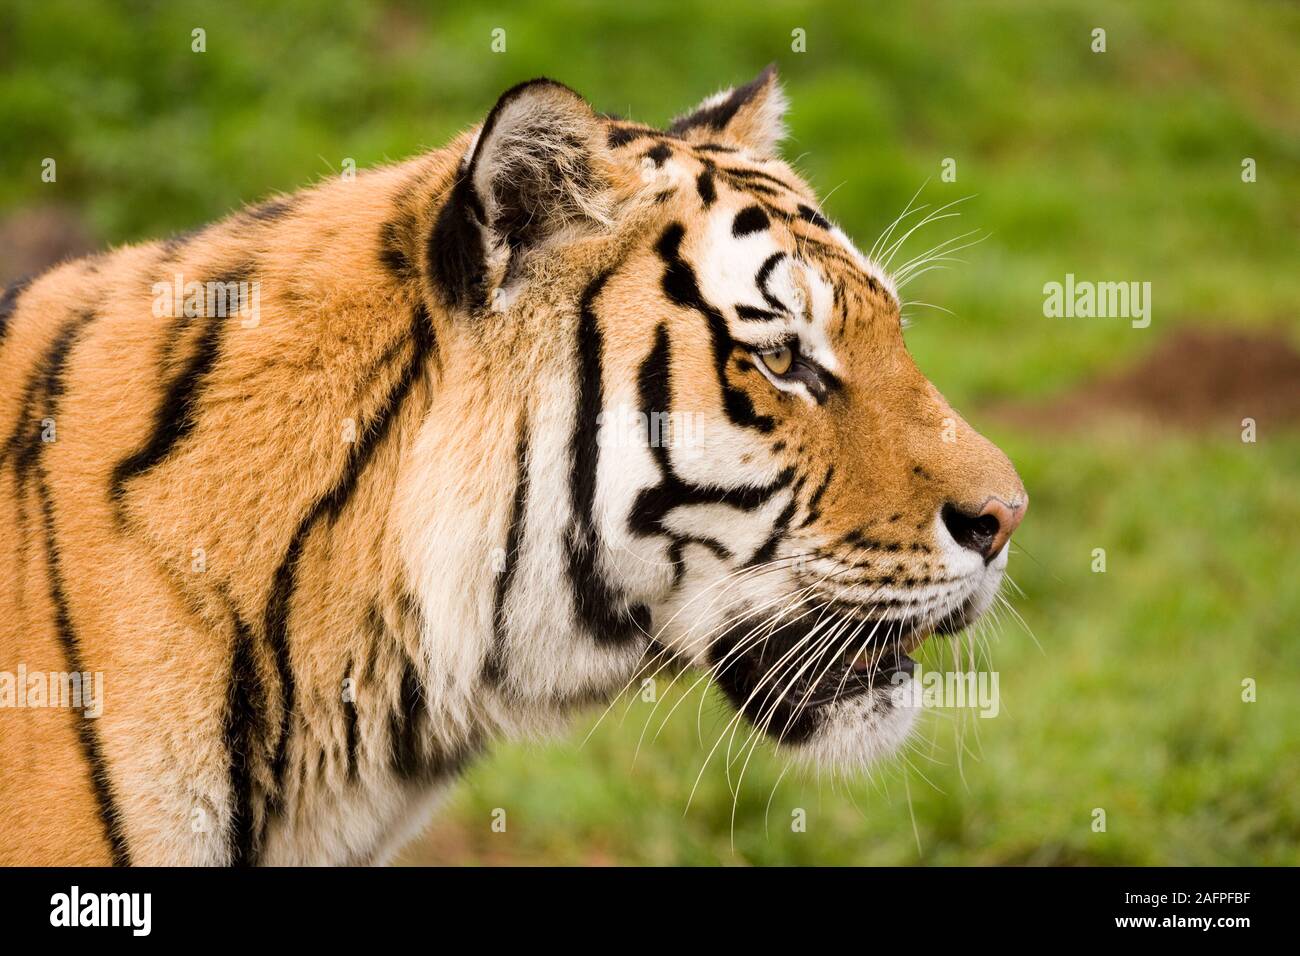 AMUR or SIBERIAN TIGER (Panthera tigris altaica). Head portrait, profile. Stripe markings on each animal are variable in breadth and length. Identification. Stock Photo